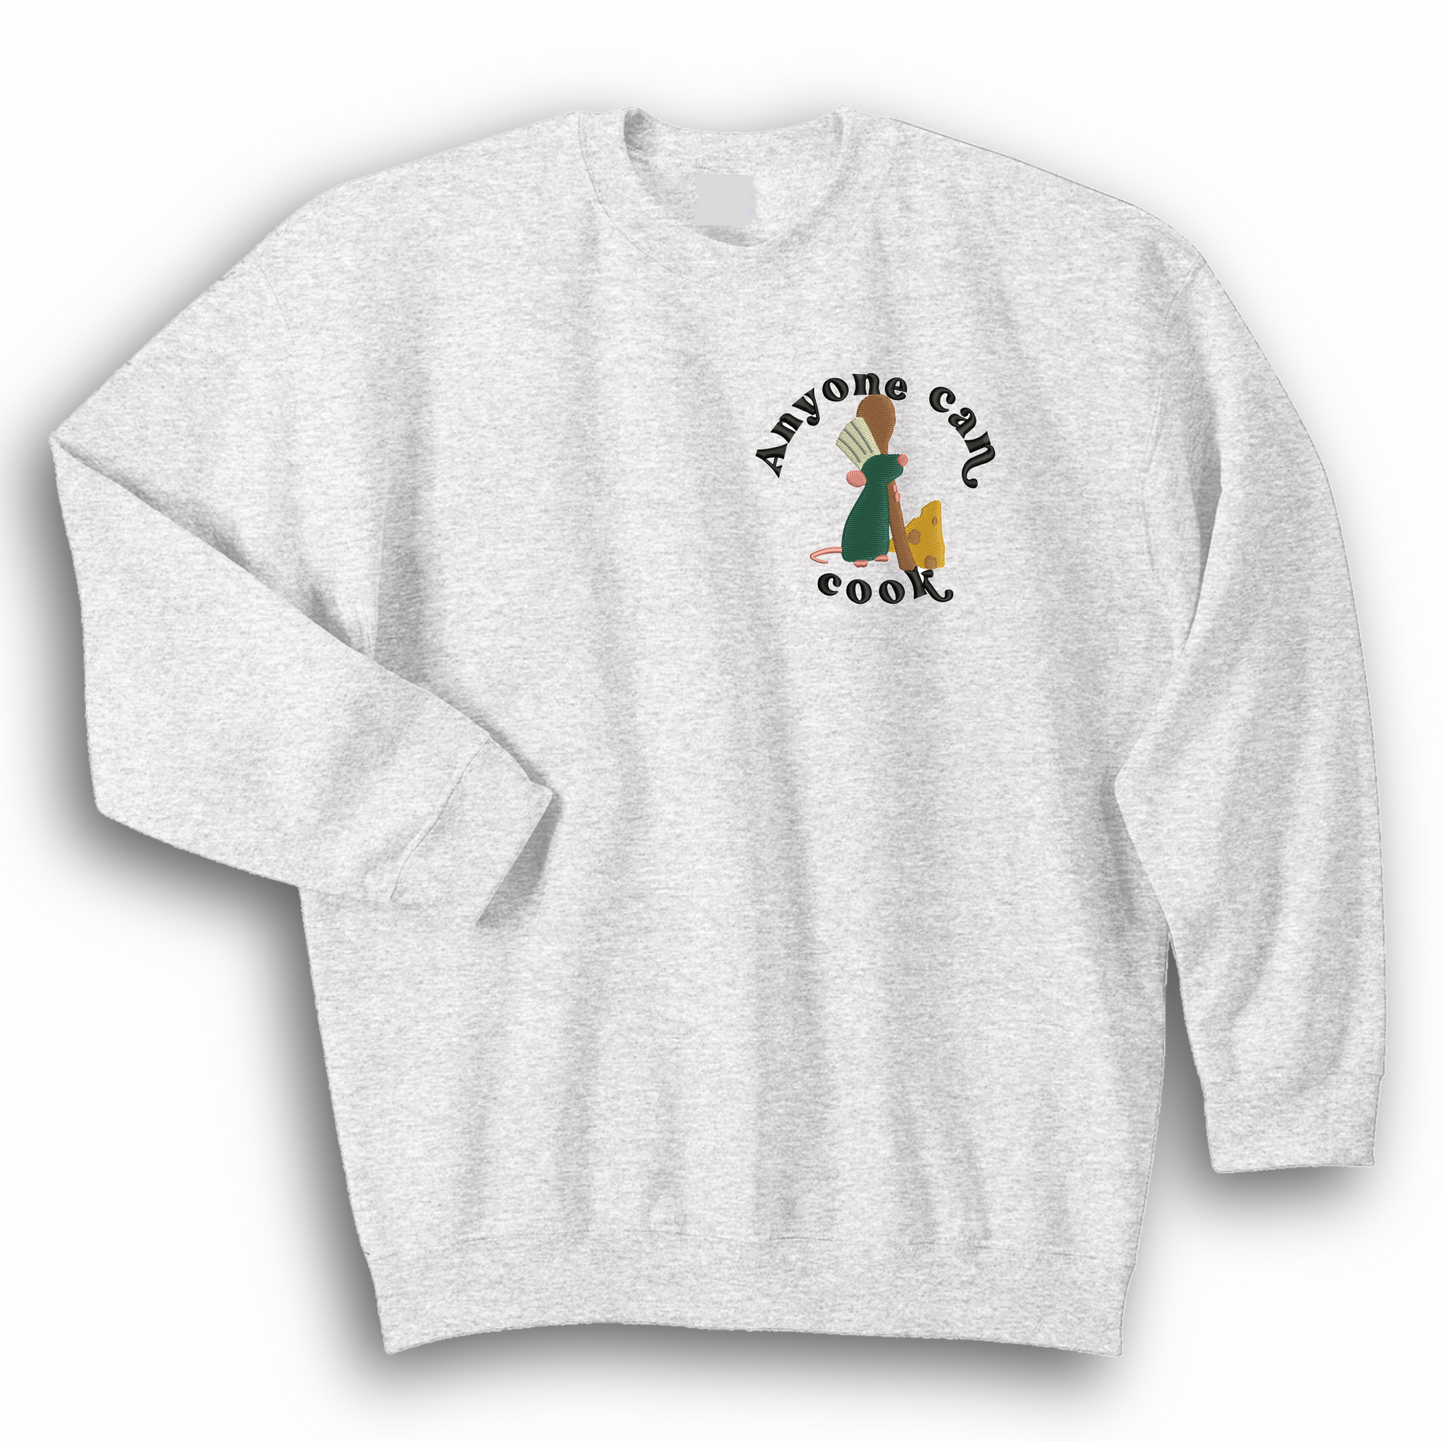 Anyone Can Cook Embroidered Sweatshirt